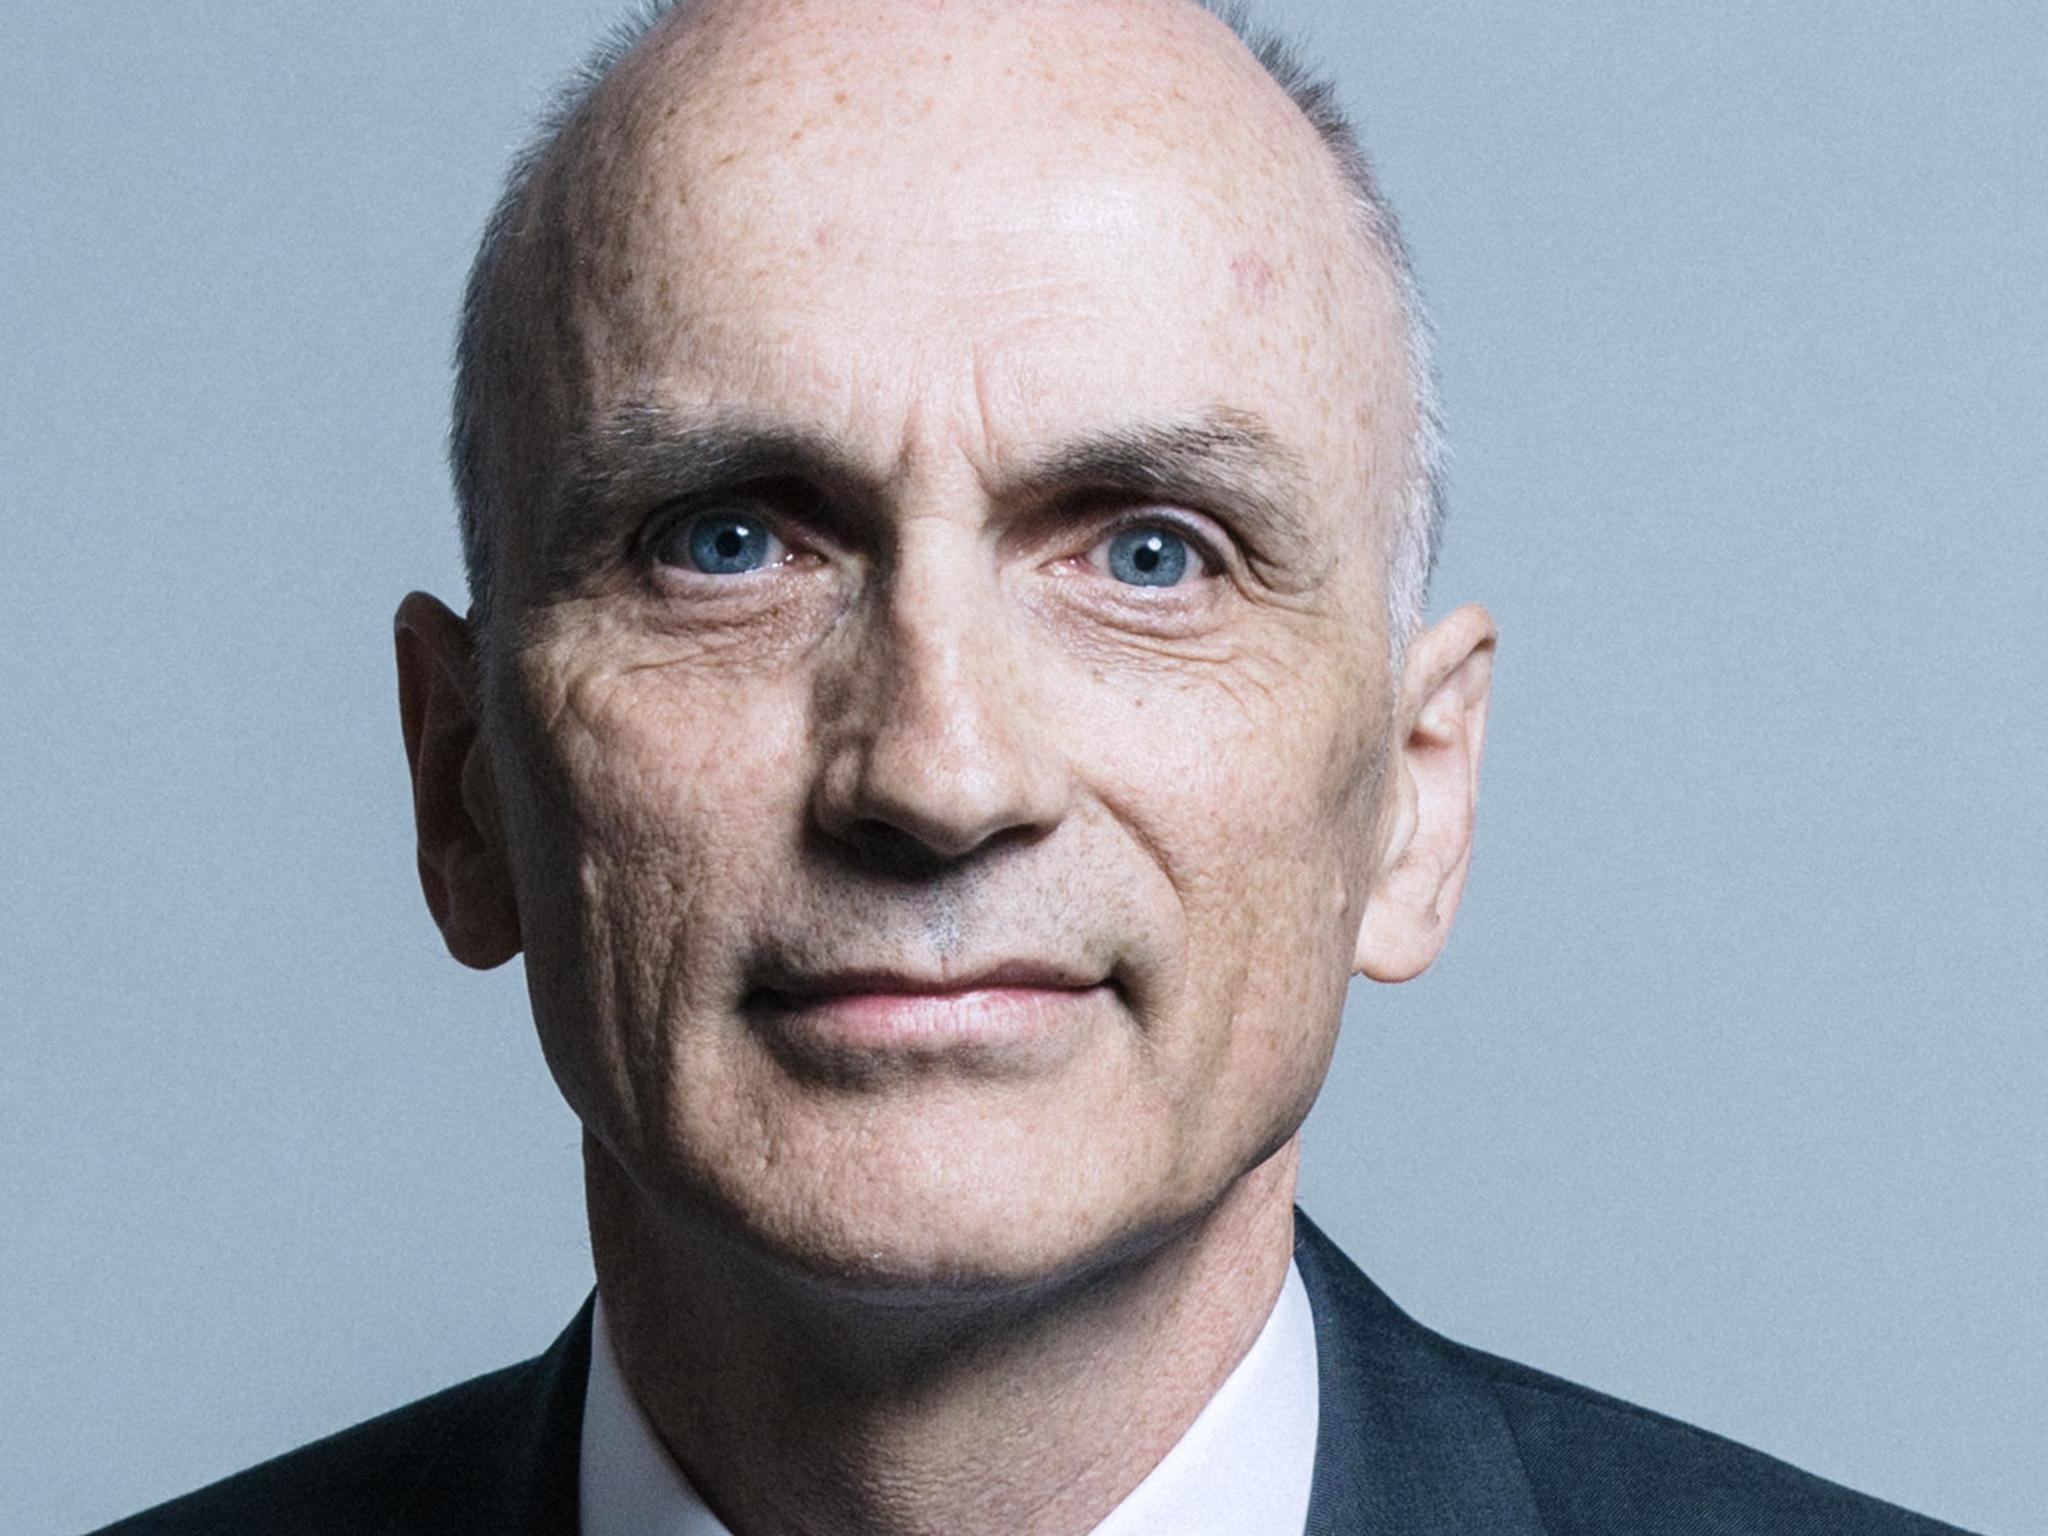 Labour MP Chris Williamson resigned from his shadow ministerial position earlier this year